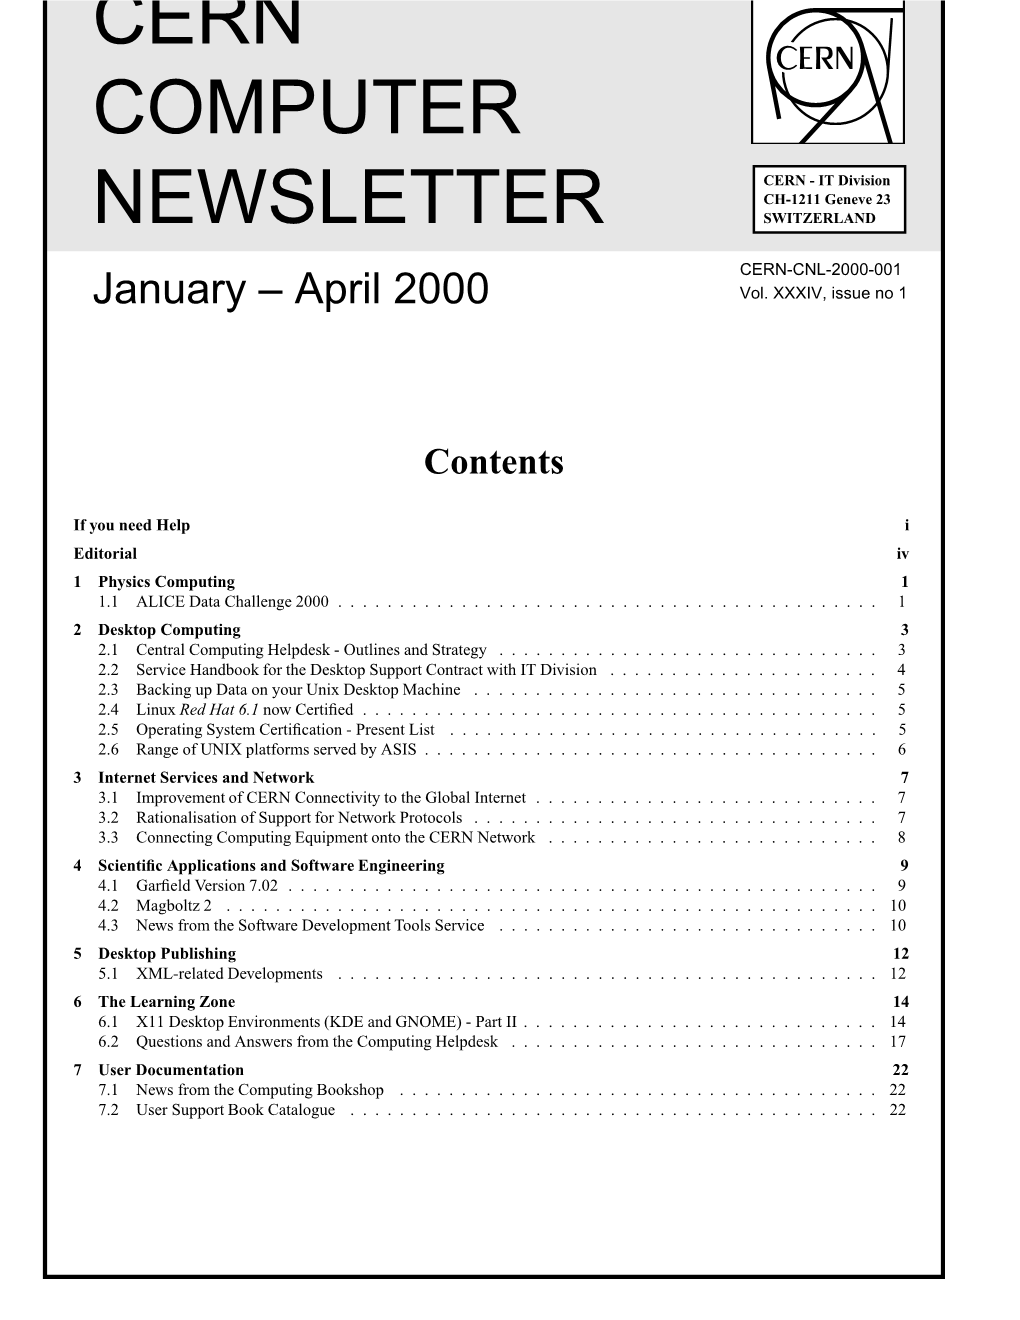 CERN Computer Newsletter Has Become a Sort of Historical Institution by Itself